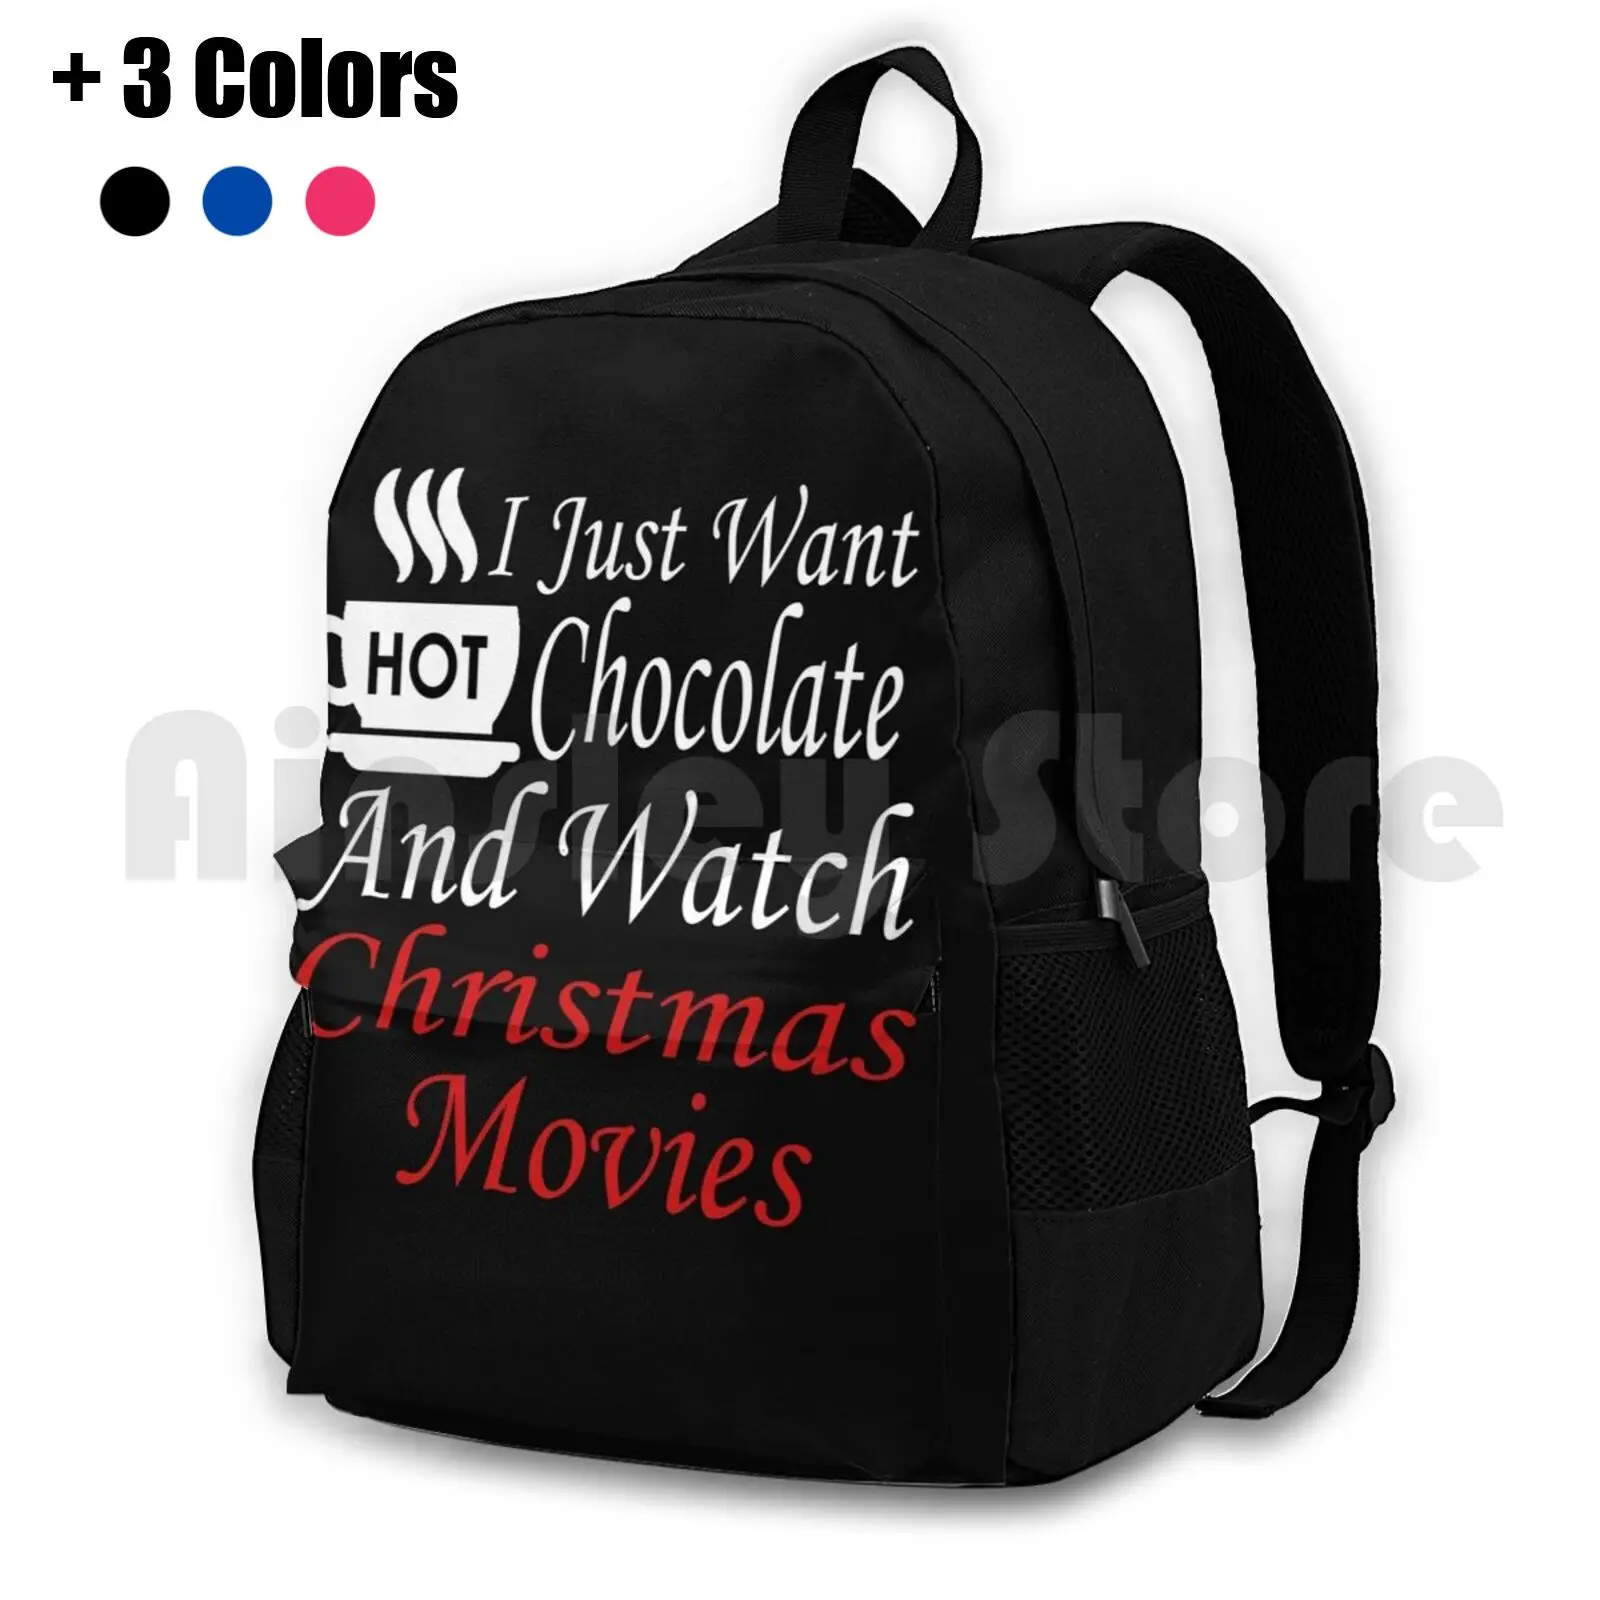 

I Just Want To Drink Hot Chocolate And Watch Christmas Movies With My Family And Friends! Outdoor Hiking Backpack Waterproof